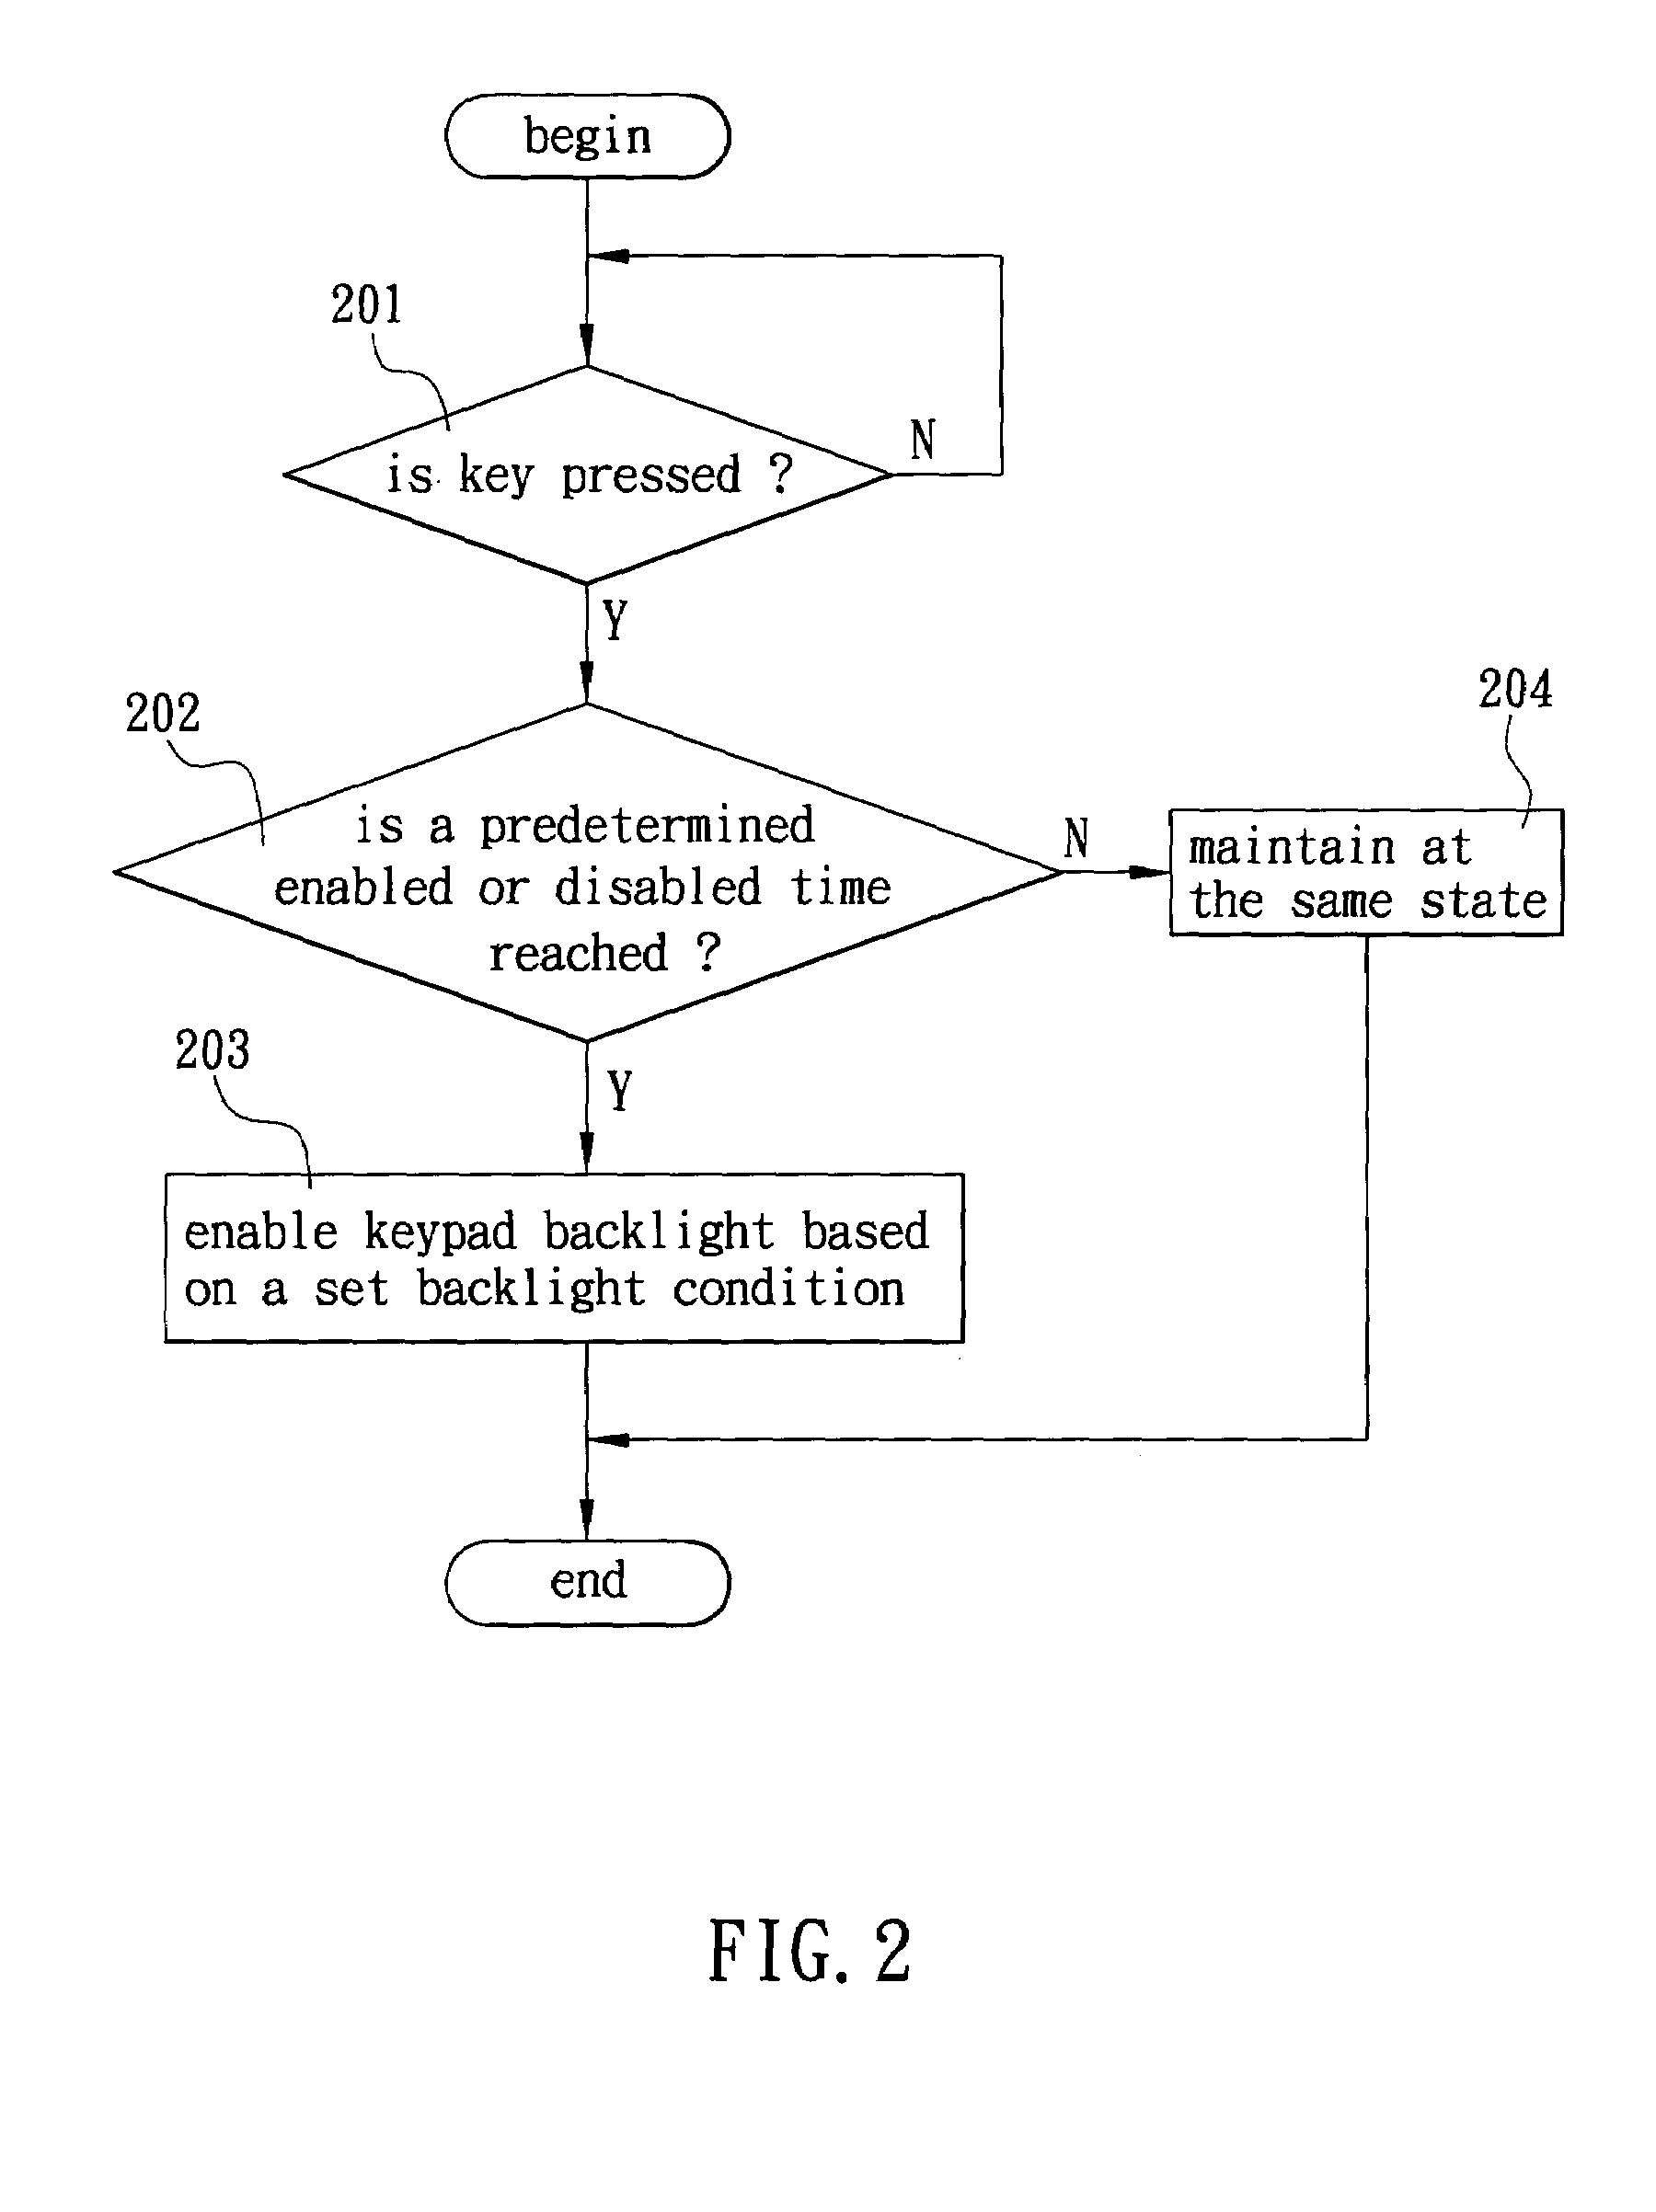 Method of automatically enabling or disabling backlight of electronic device based on a predetermined time